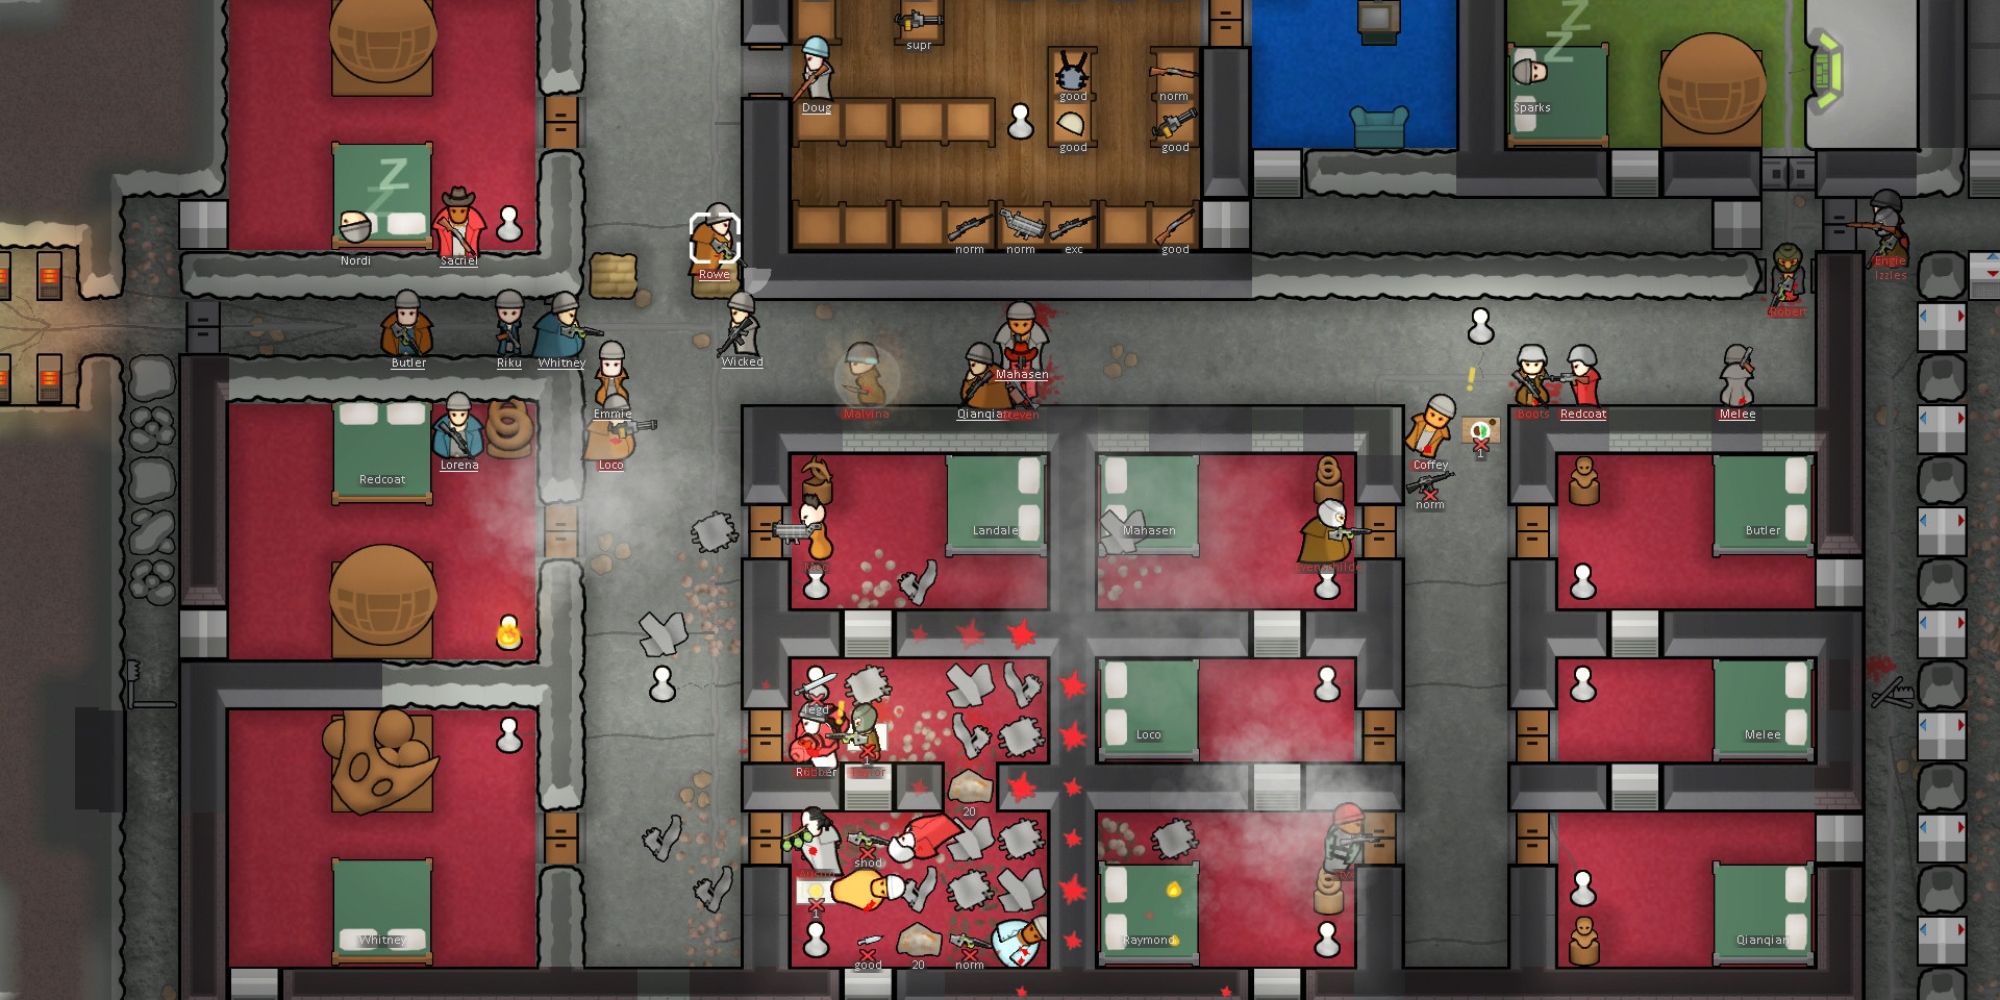 Workers in RimWorld